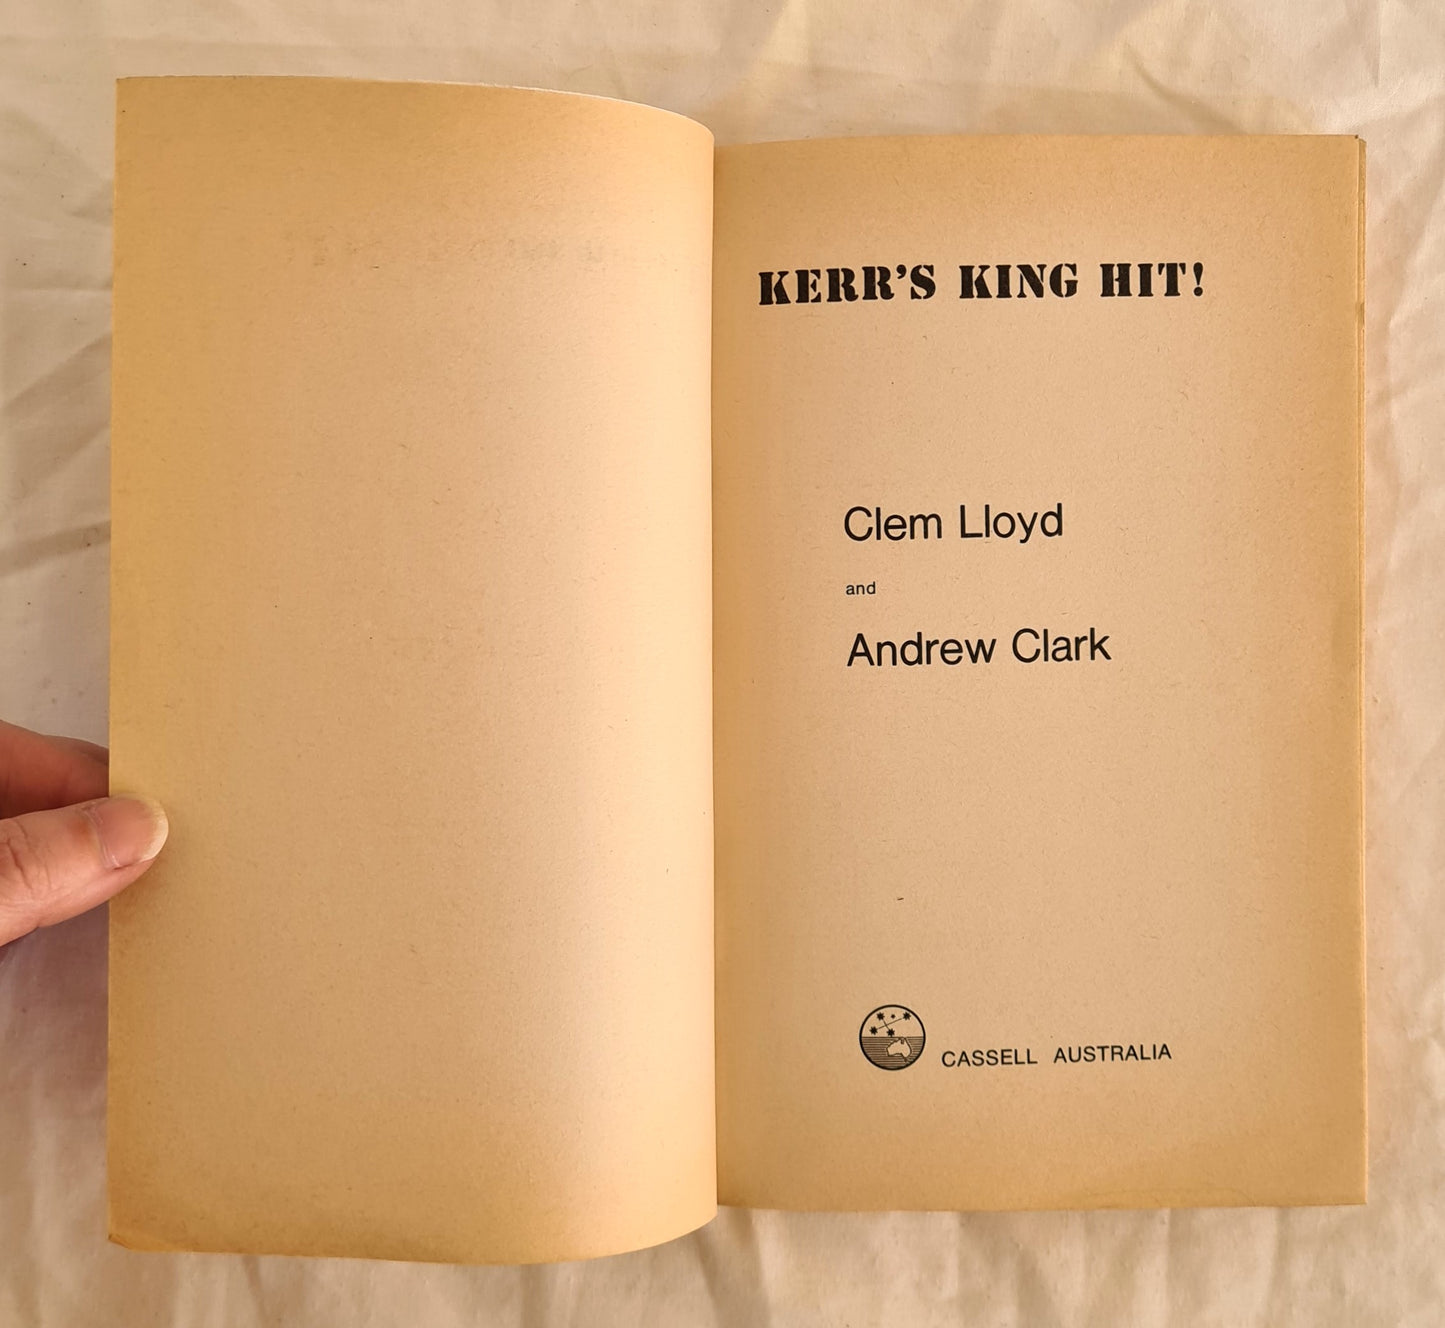 Kerr’s King Hit! by Clem Lloyd and Andrew Clark